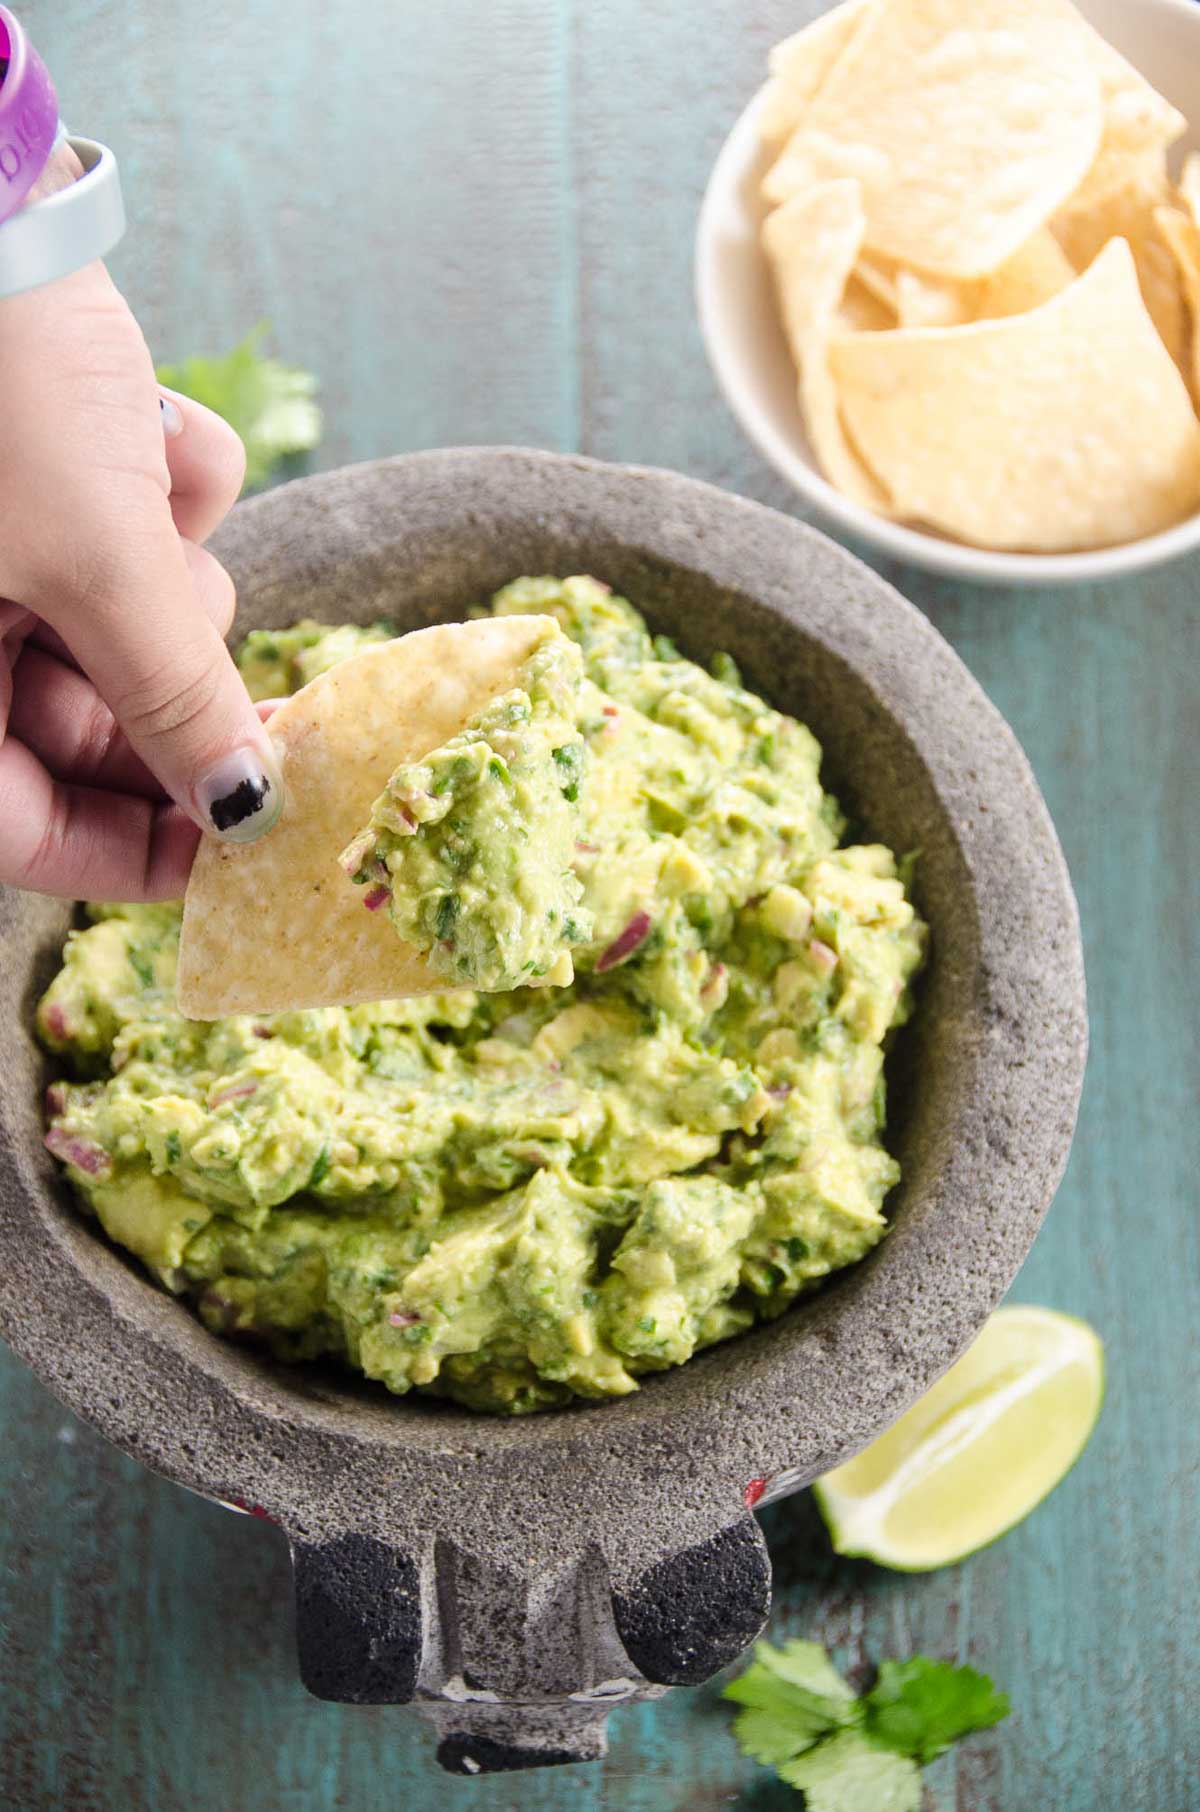 4 ingredient guacamole recipe in a molcajete with a child's hand dipping a tortilla chip